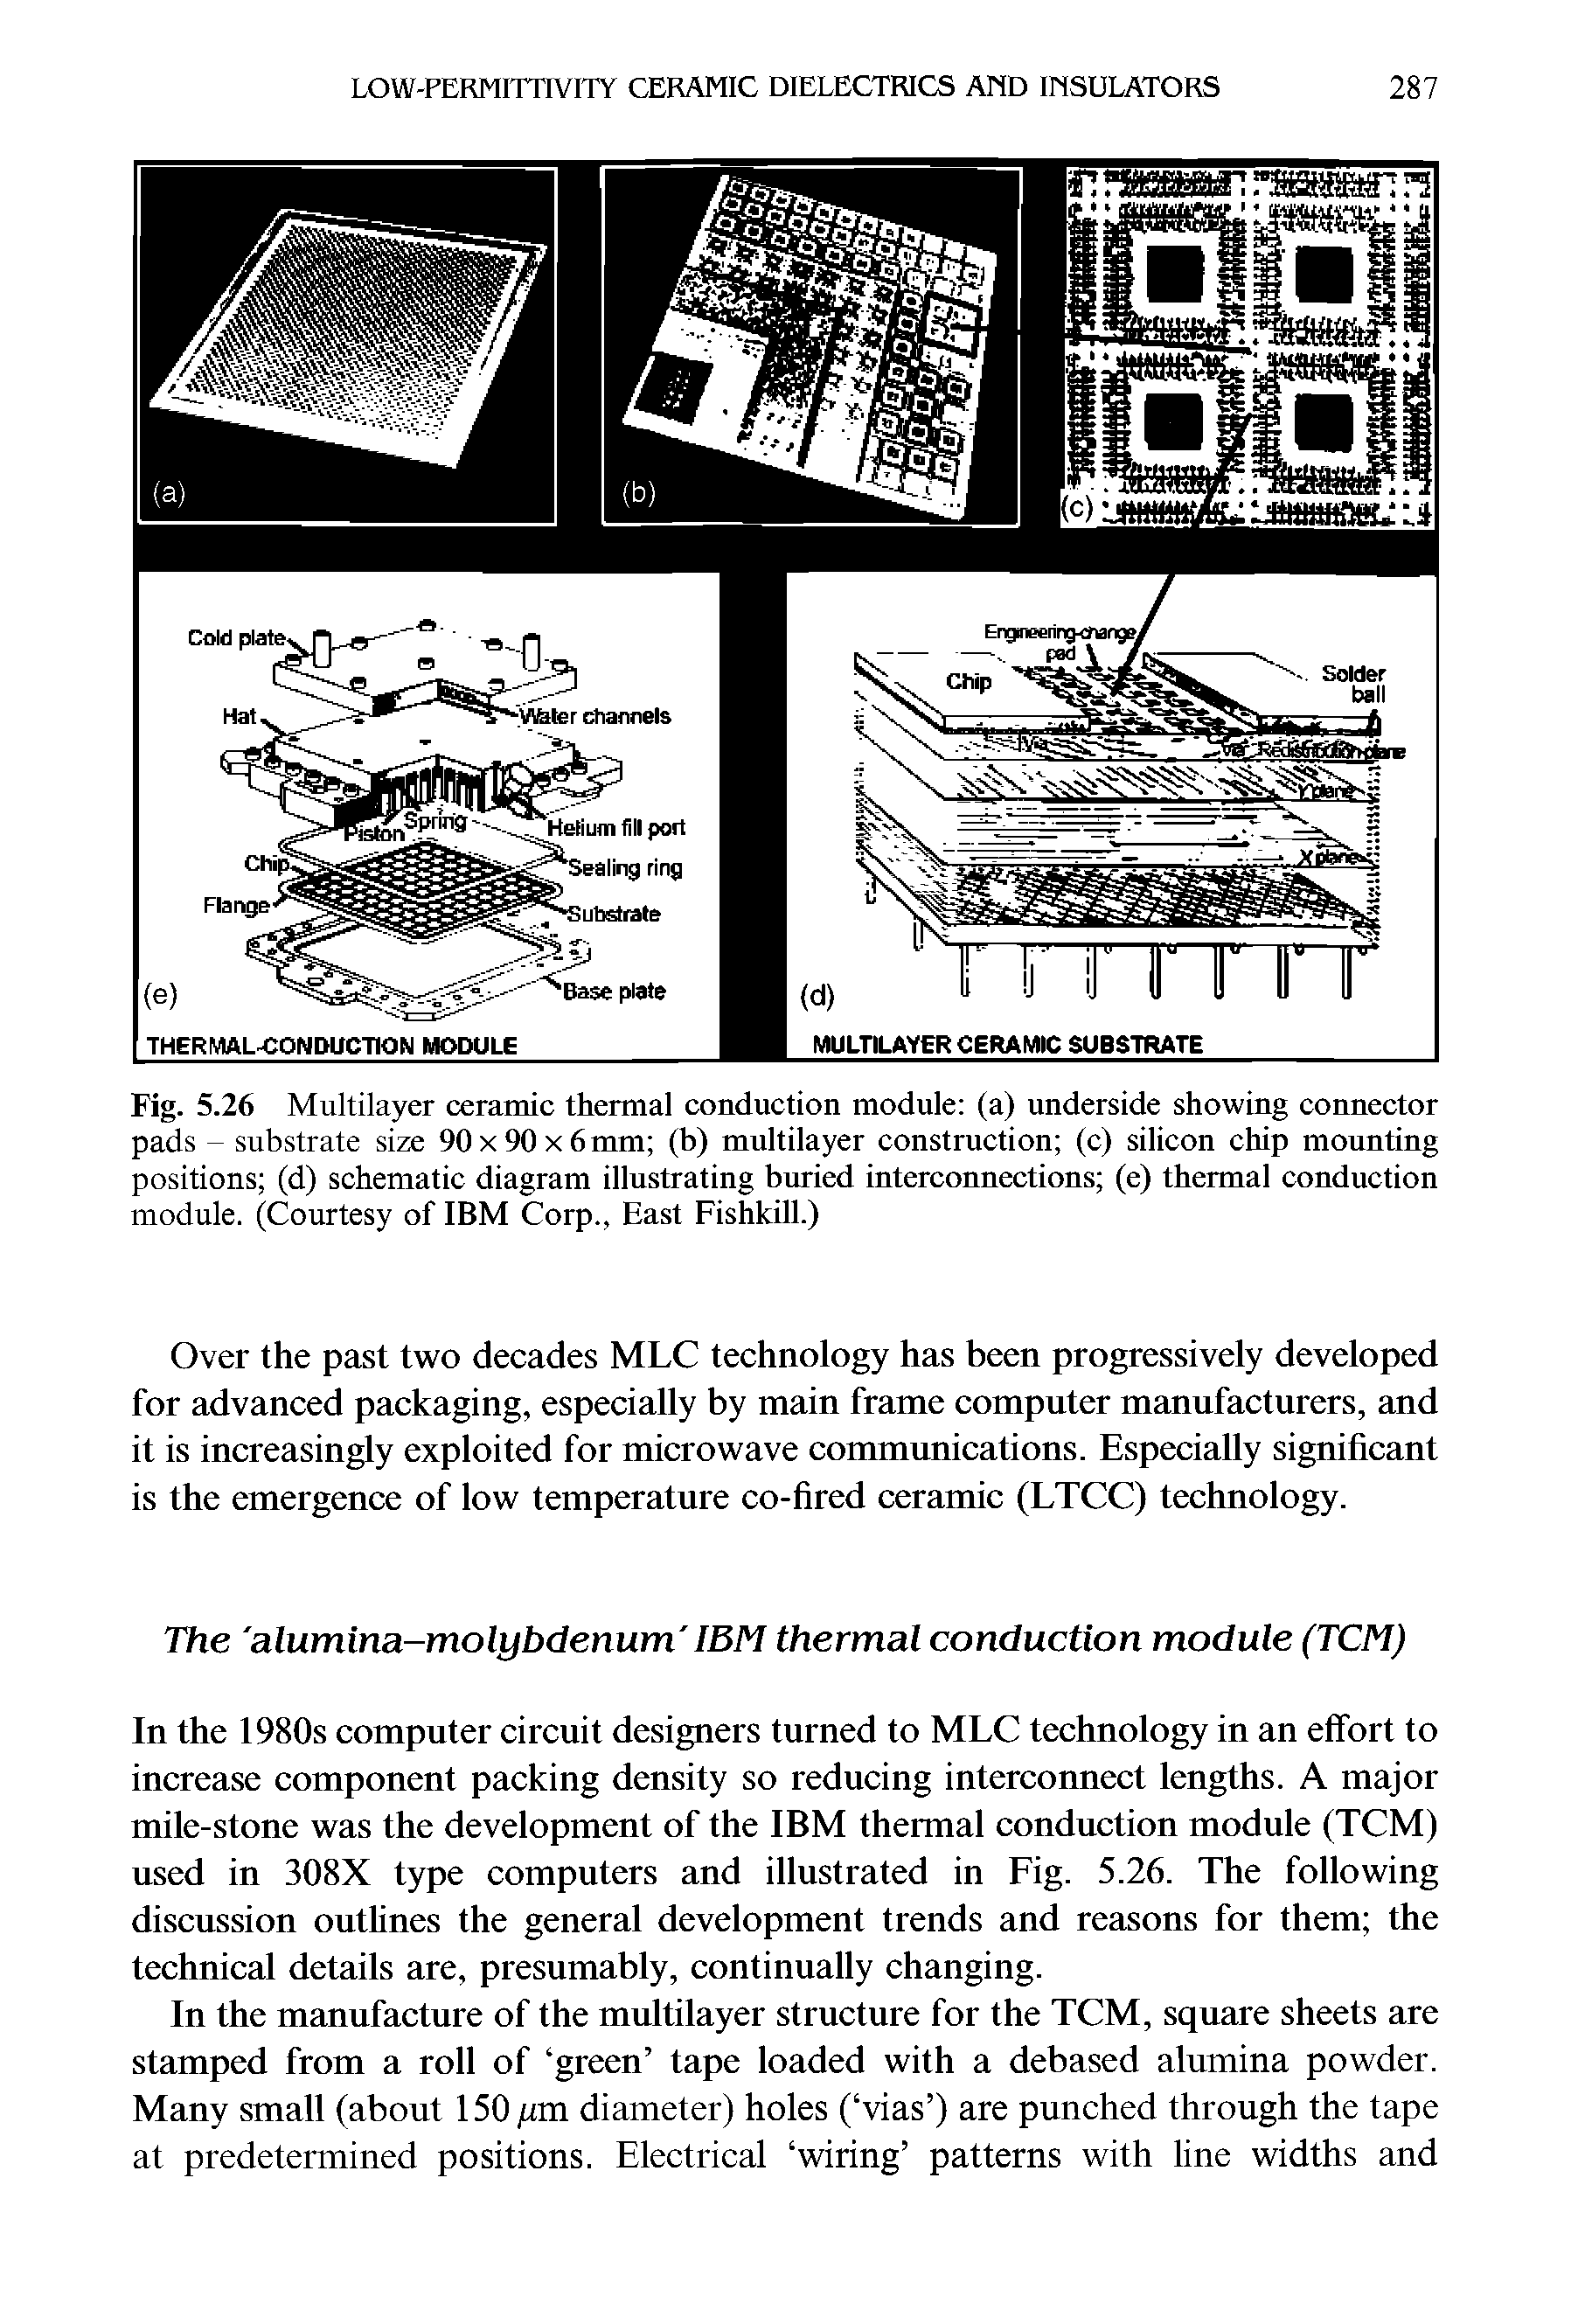 Fig. 5.26 Multilayer ceramic thermal conduction module (a) underside showing connector pads - substrate size 90 x 90 x 6 mm (b) multilayer construction (c) silicon chip mounting positions (d) schematic diagram illustrating buried interconnections (e) thermal conduction module. (Courtesy of IBM Corp., East Fishkill.)...